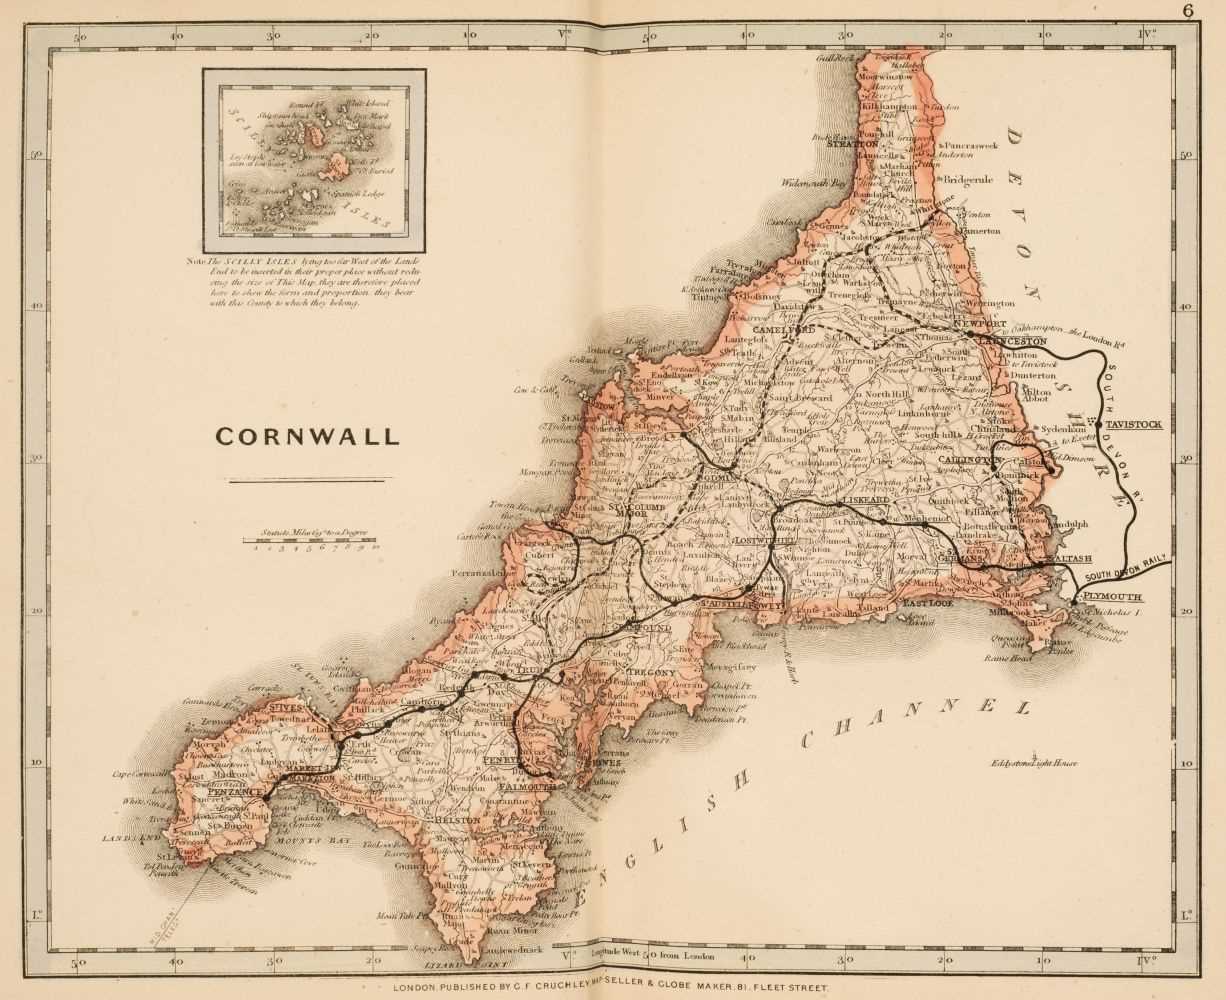 Lot 35 - Cruchley (G.F., publisher). Cruchley's County Atlas of England & Wales, 1875